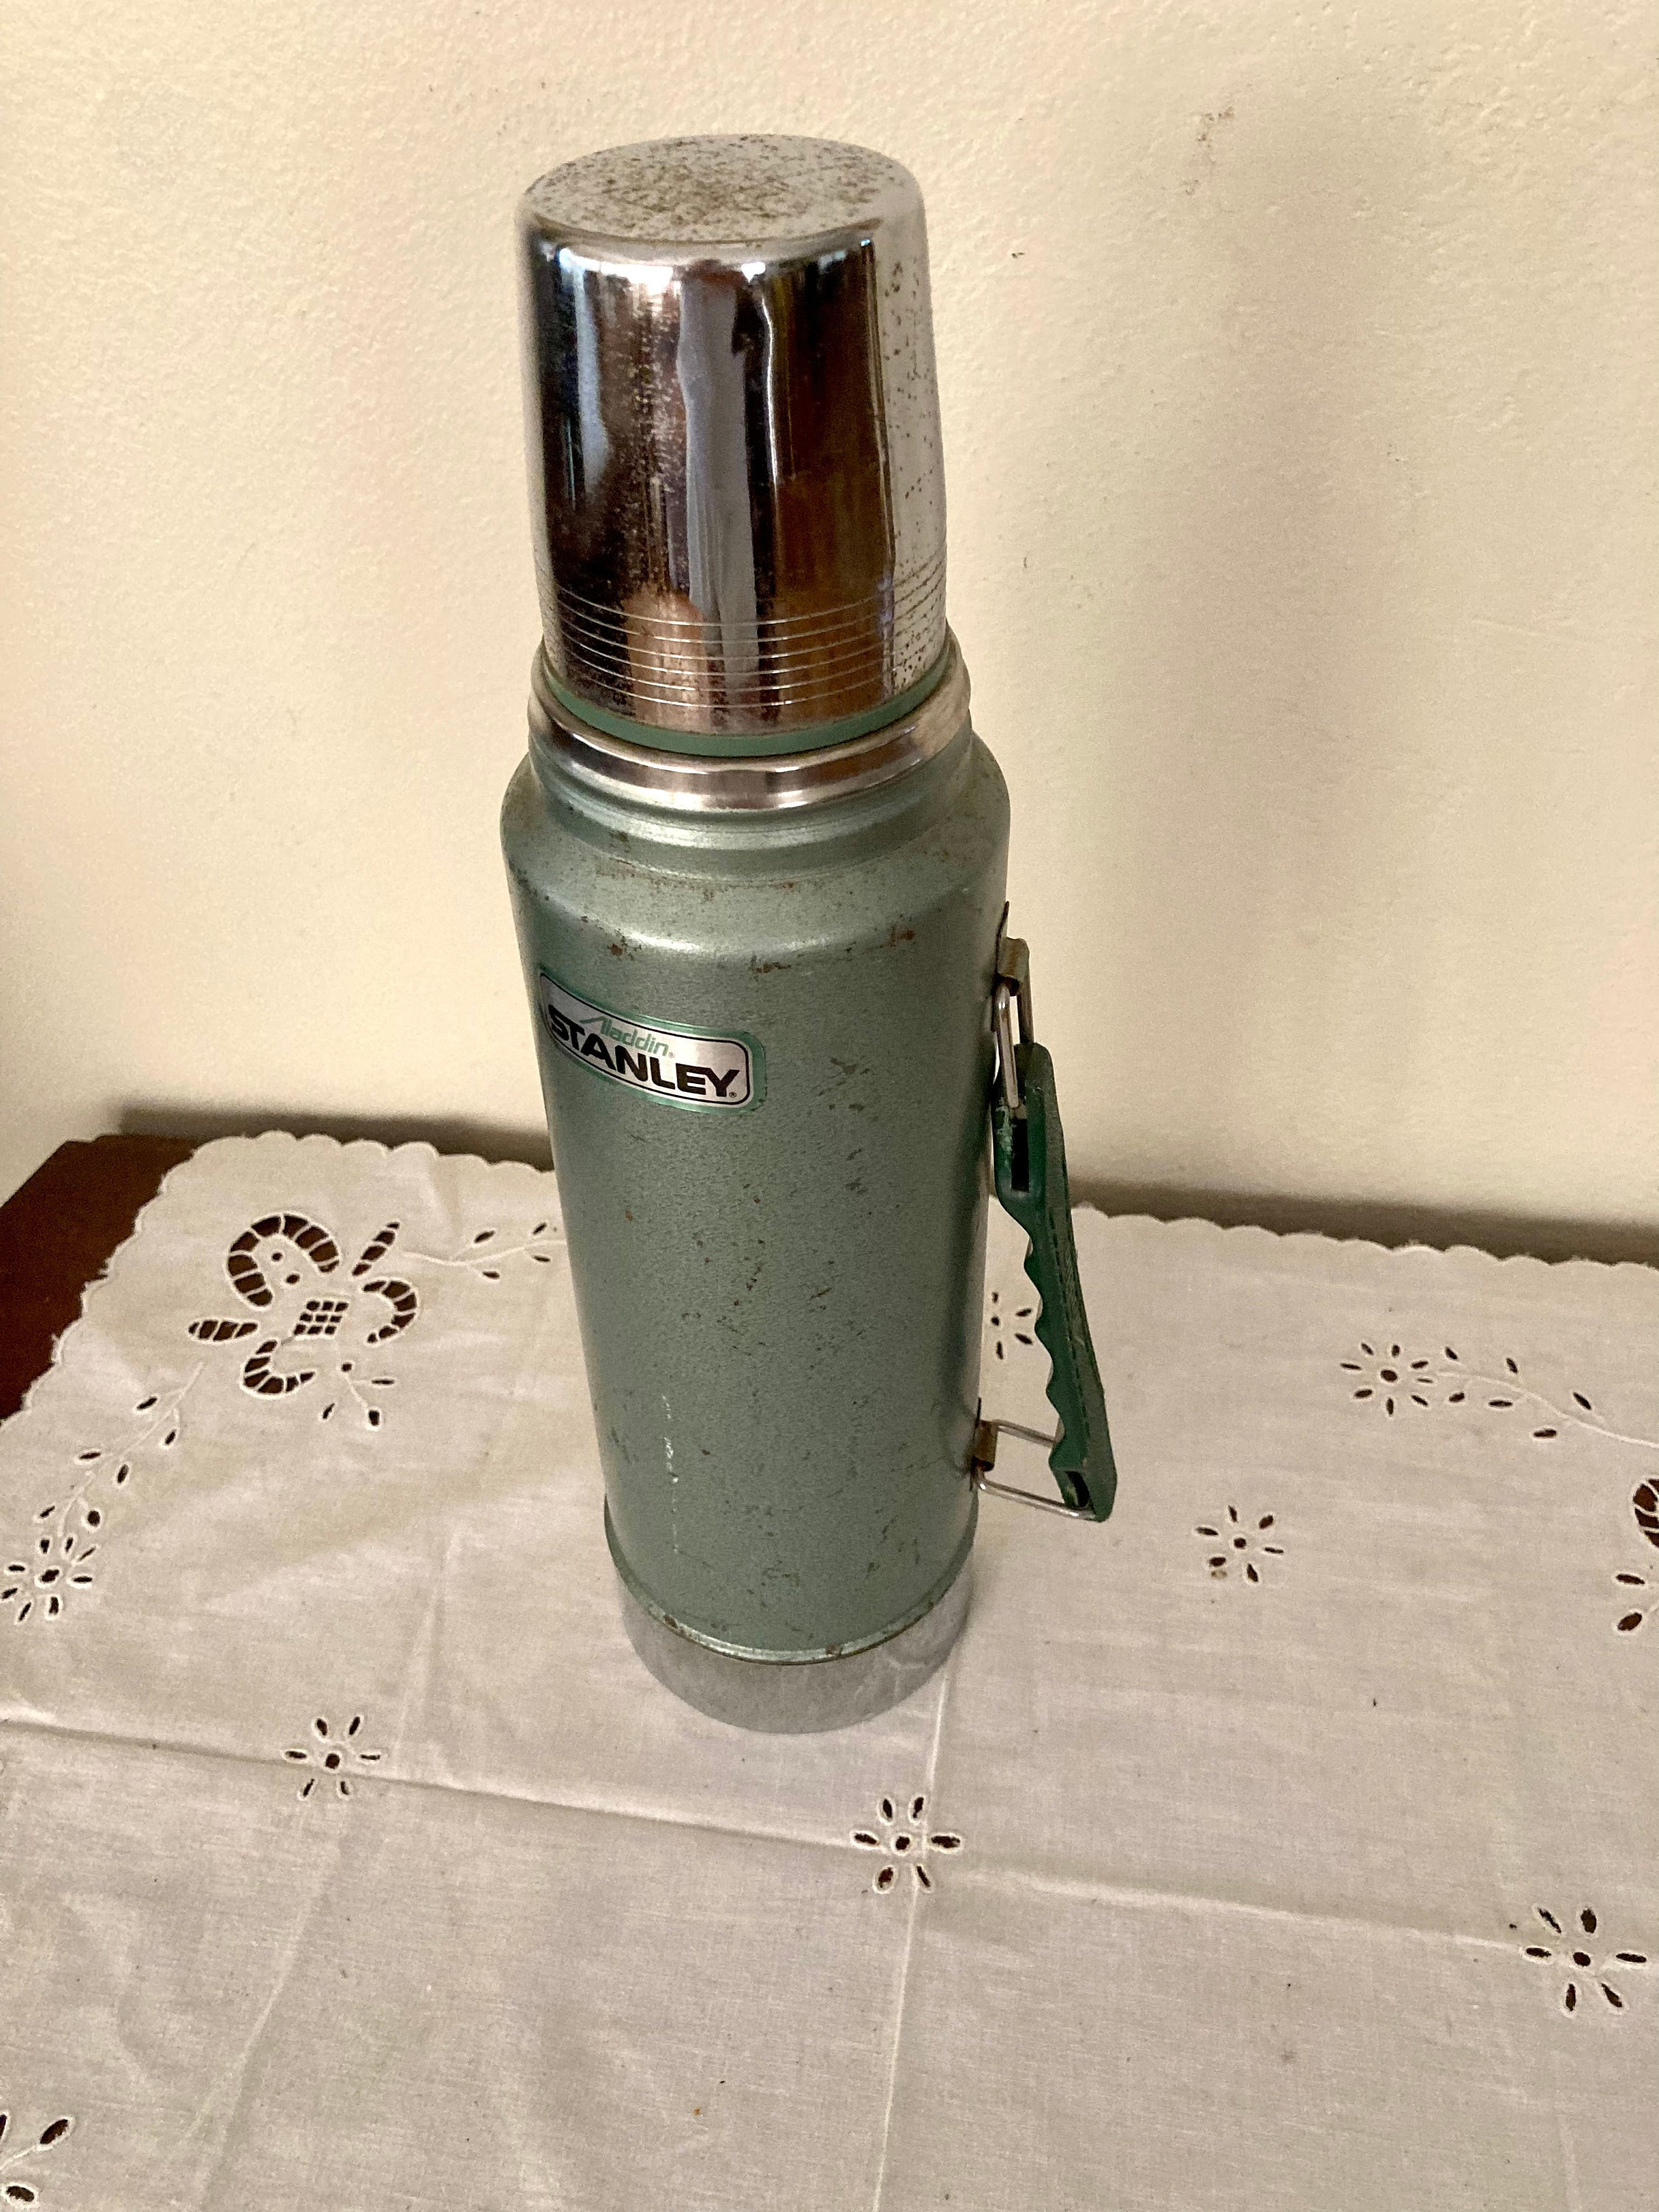 Vintage Stanley Thermos, Stanley Aladdin Thermos A-944DH Vacuum Bottle 